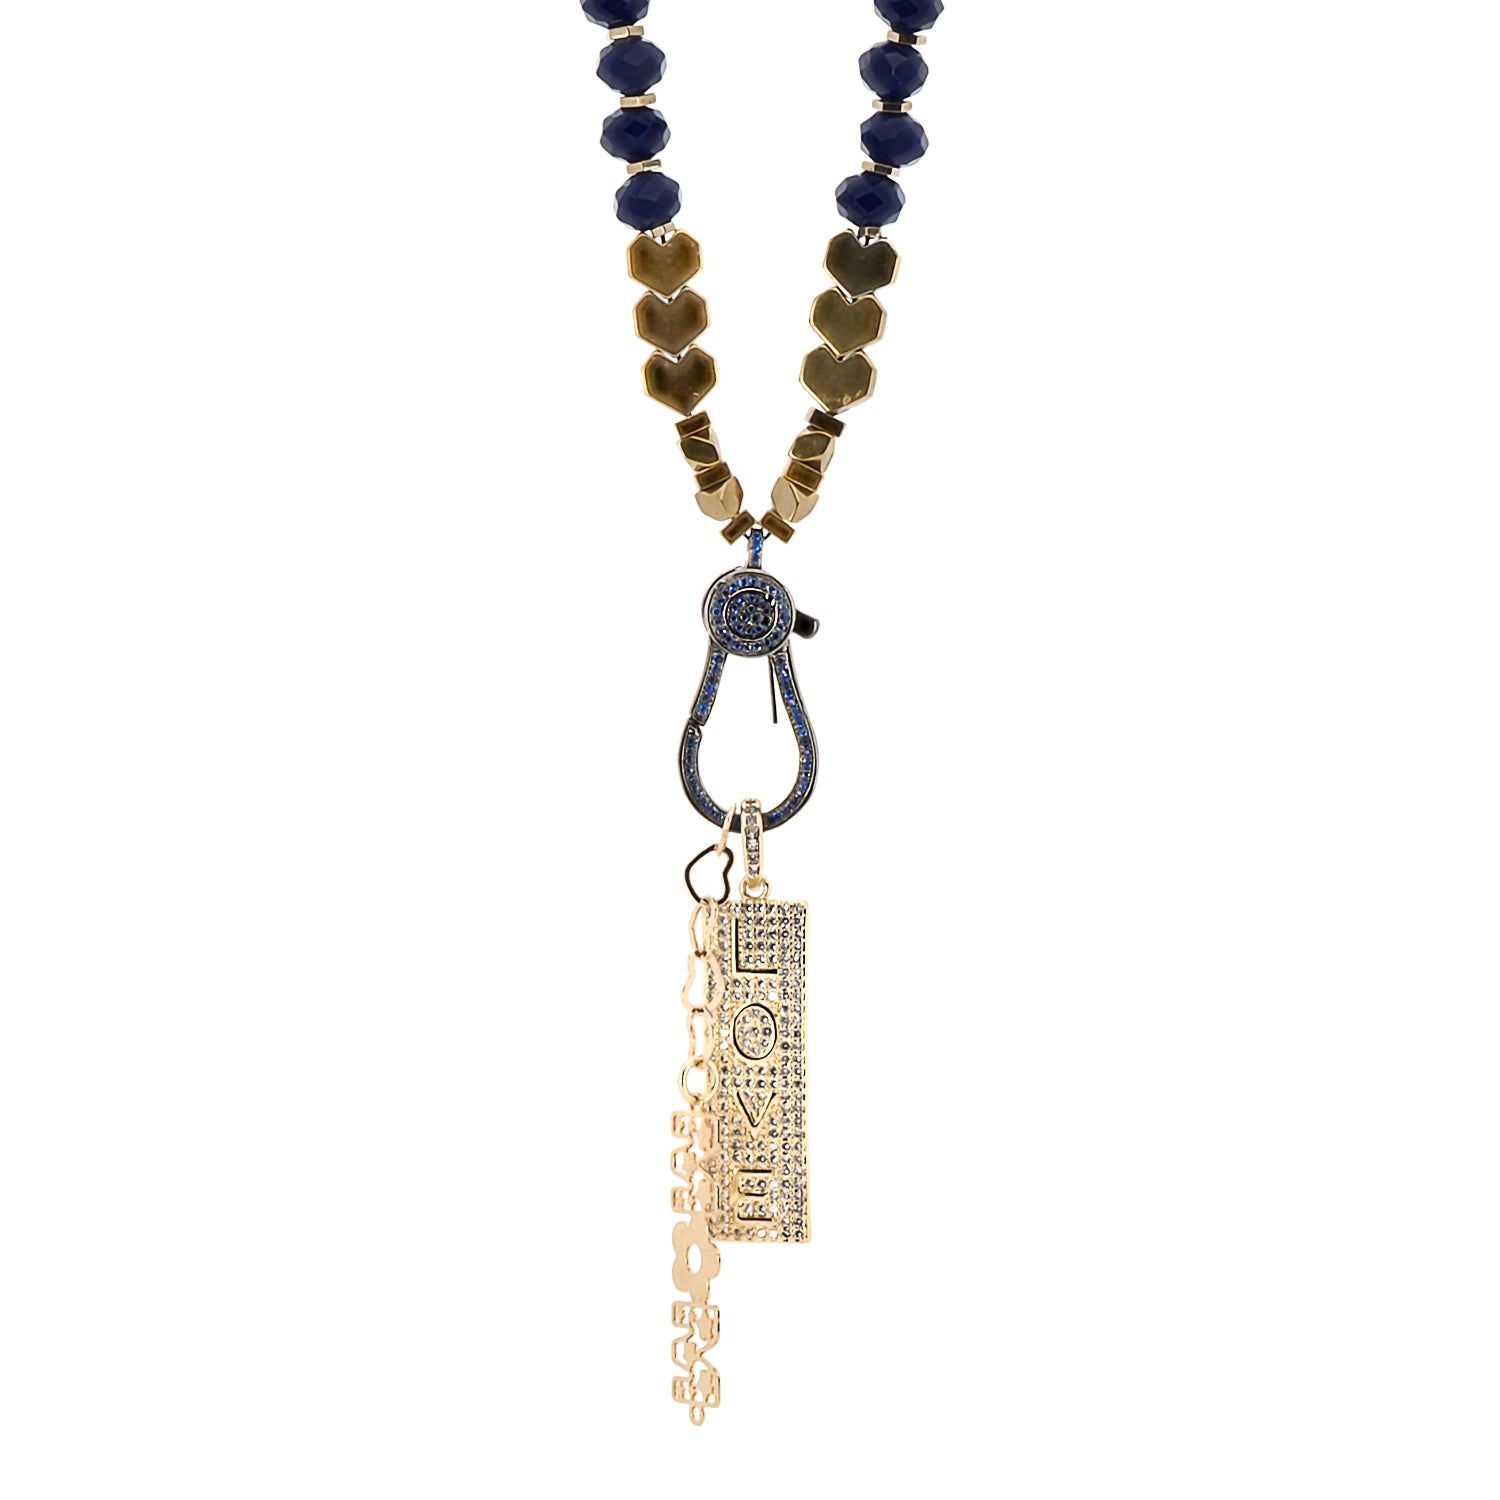 Blue crystal bead necklace with gold pendant